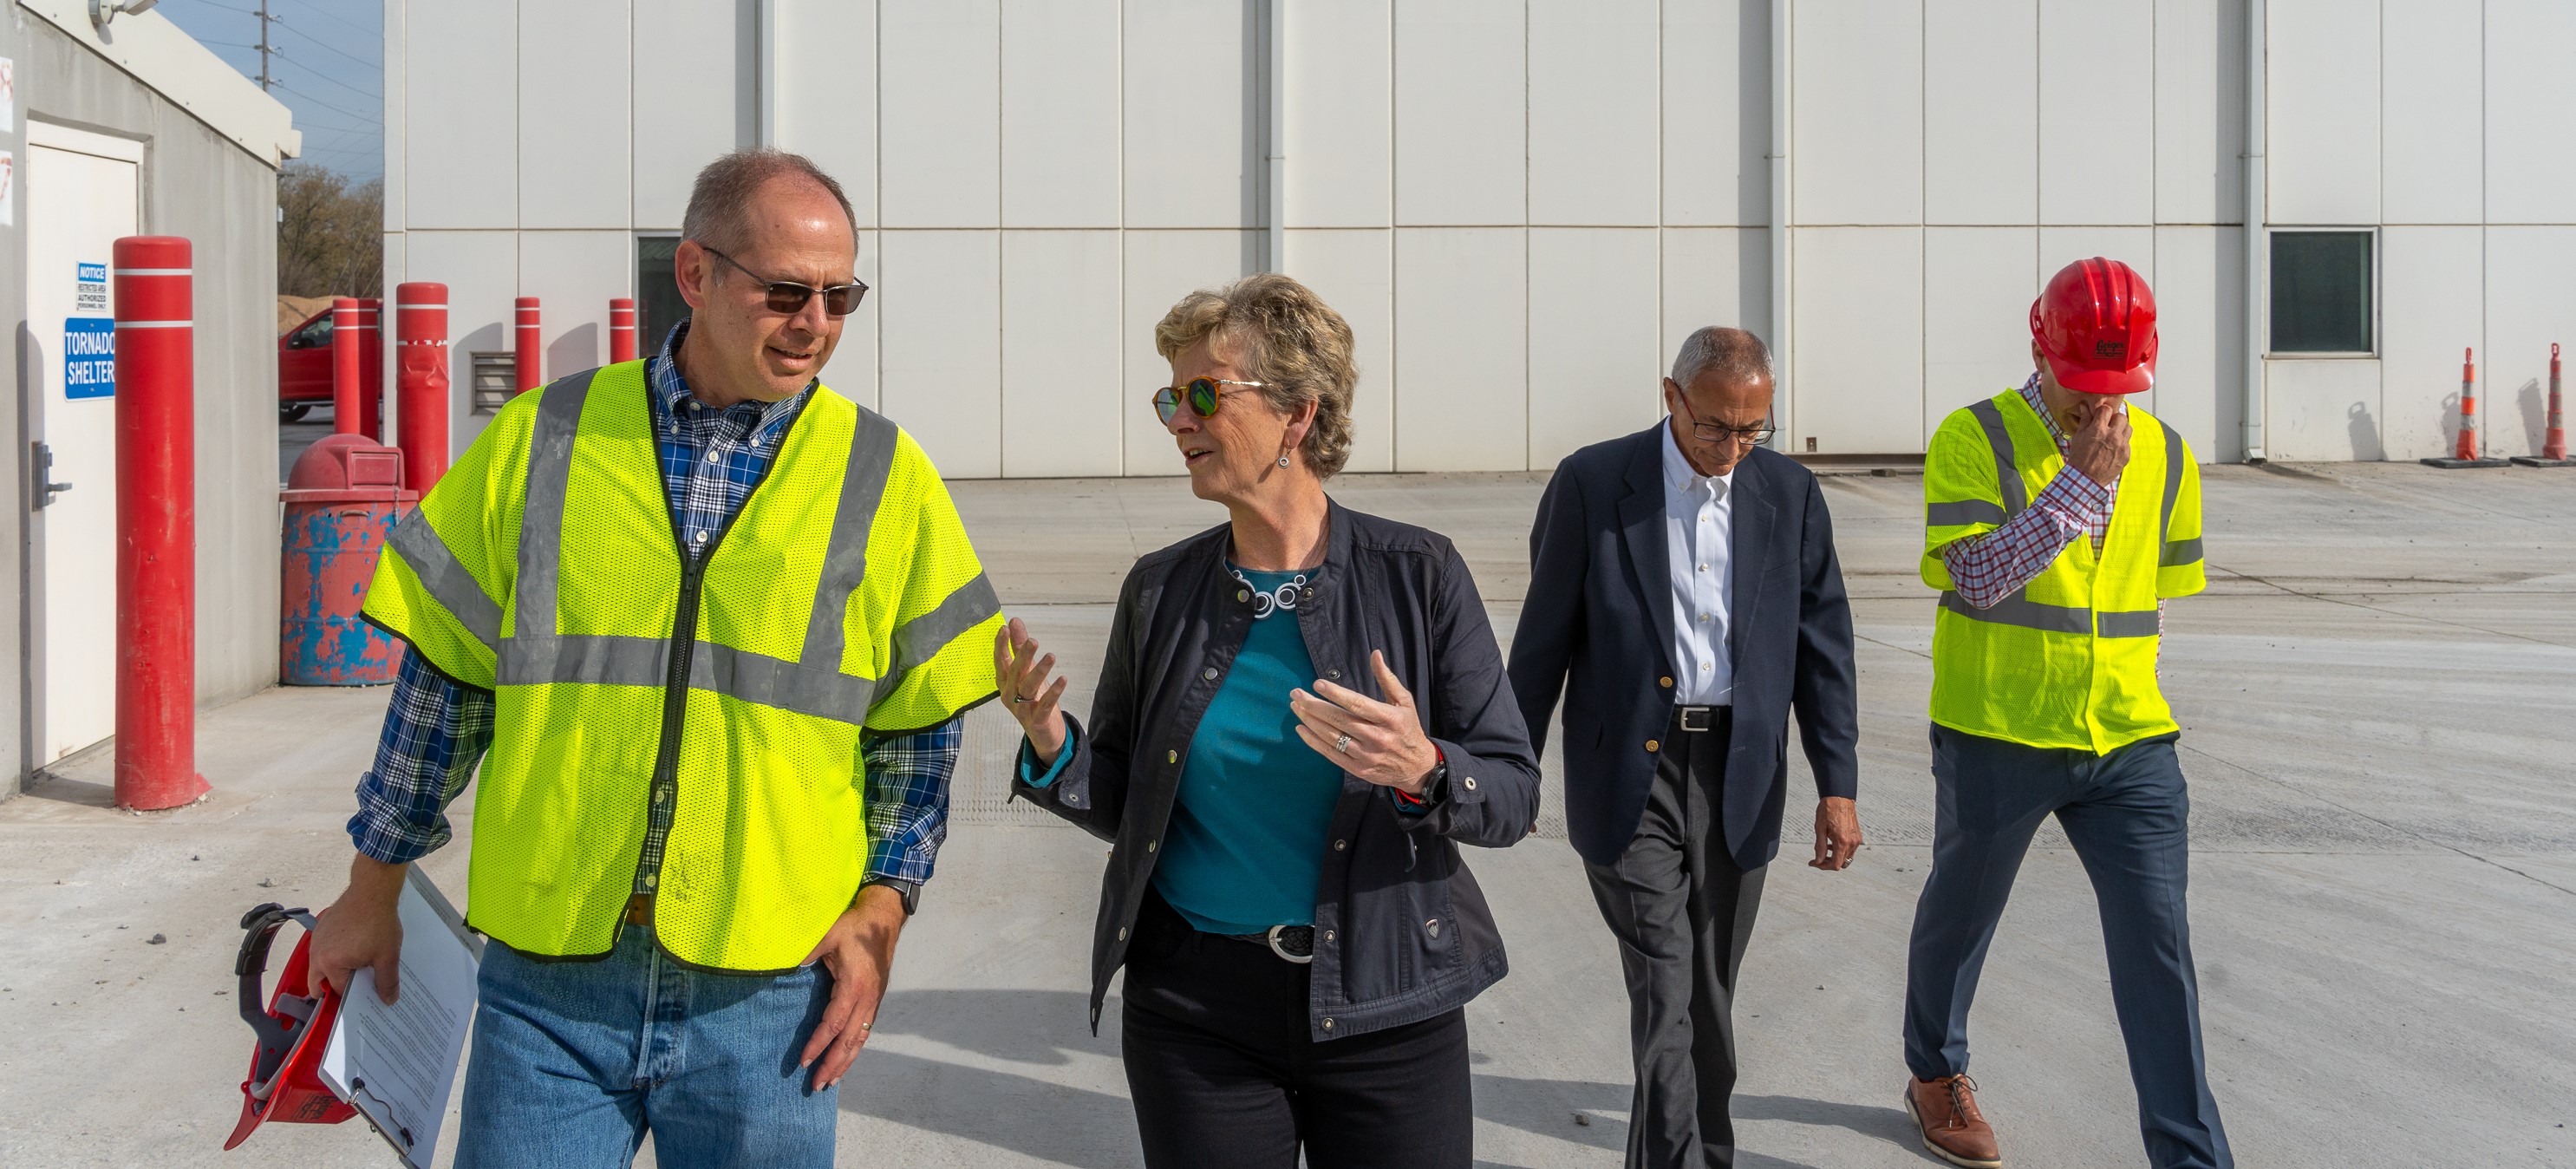 Administrator Robin Carnahan wearing a bright yellow construction vest walking with three men also wearing yellow construction vests